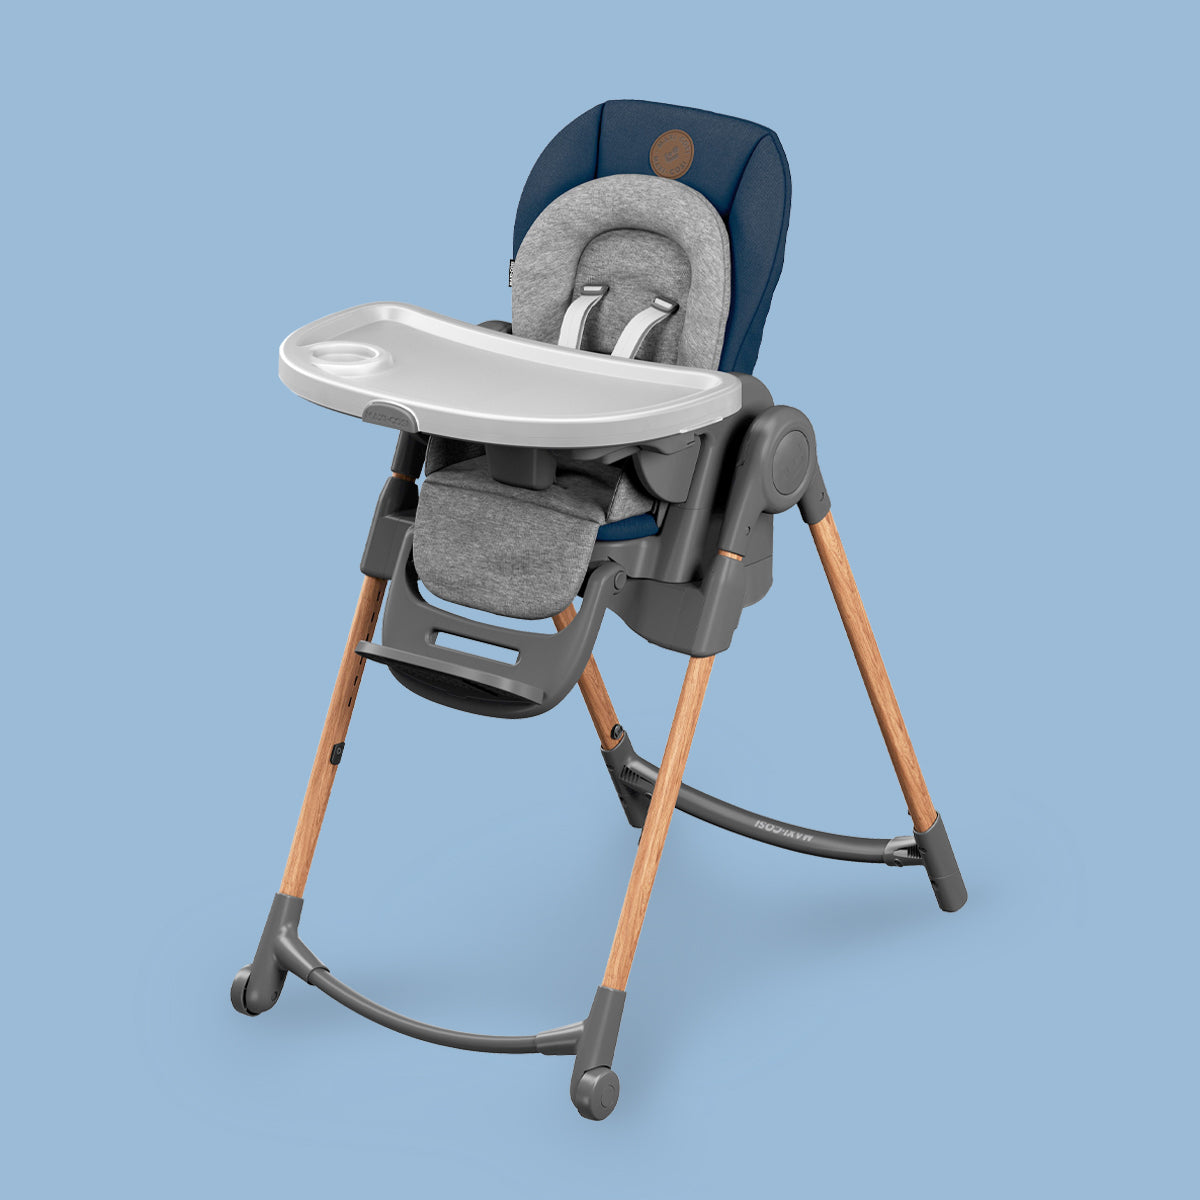 A Maxi-Cosi Minla Baby High Chair by Maxi-Cosi UAE on a blue background.